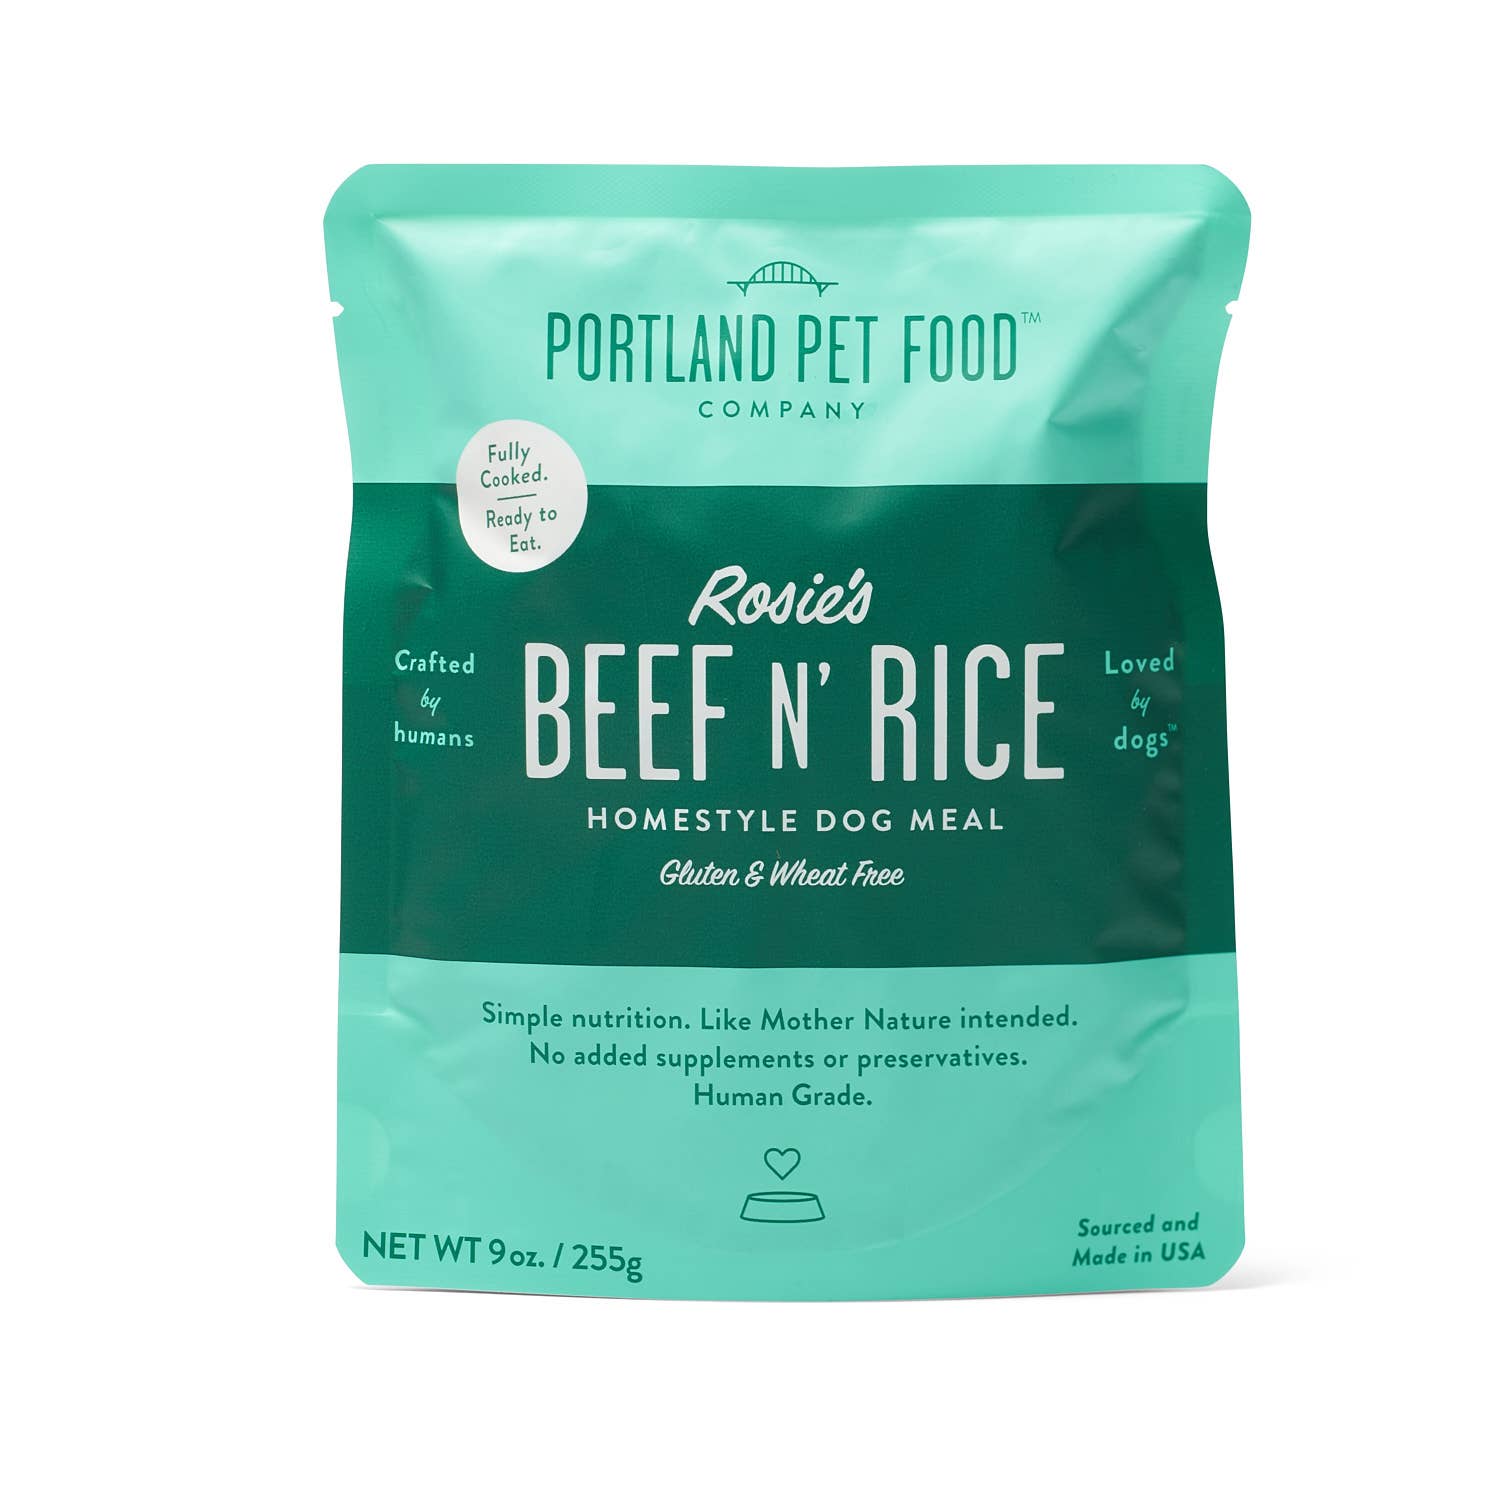 Portland Pet Food Company - Rosie's Beef N Rice Homestyle Dog Meal